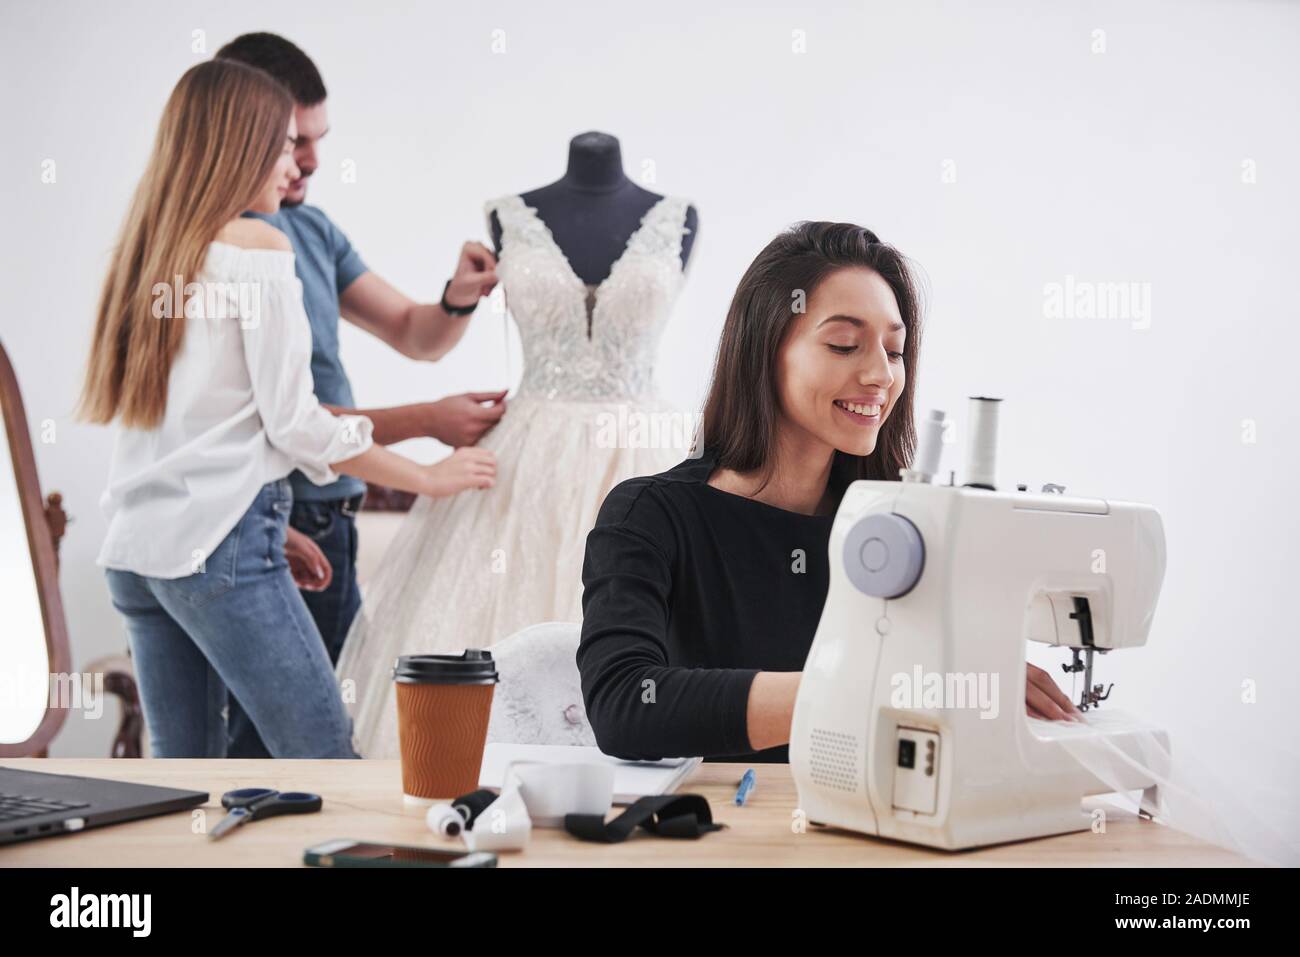 Nice atmosphere. Female fashion designer works on the new clothes in the workshop with group of people behind Stock Photo